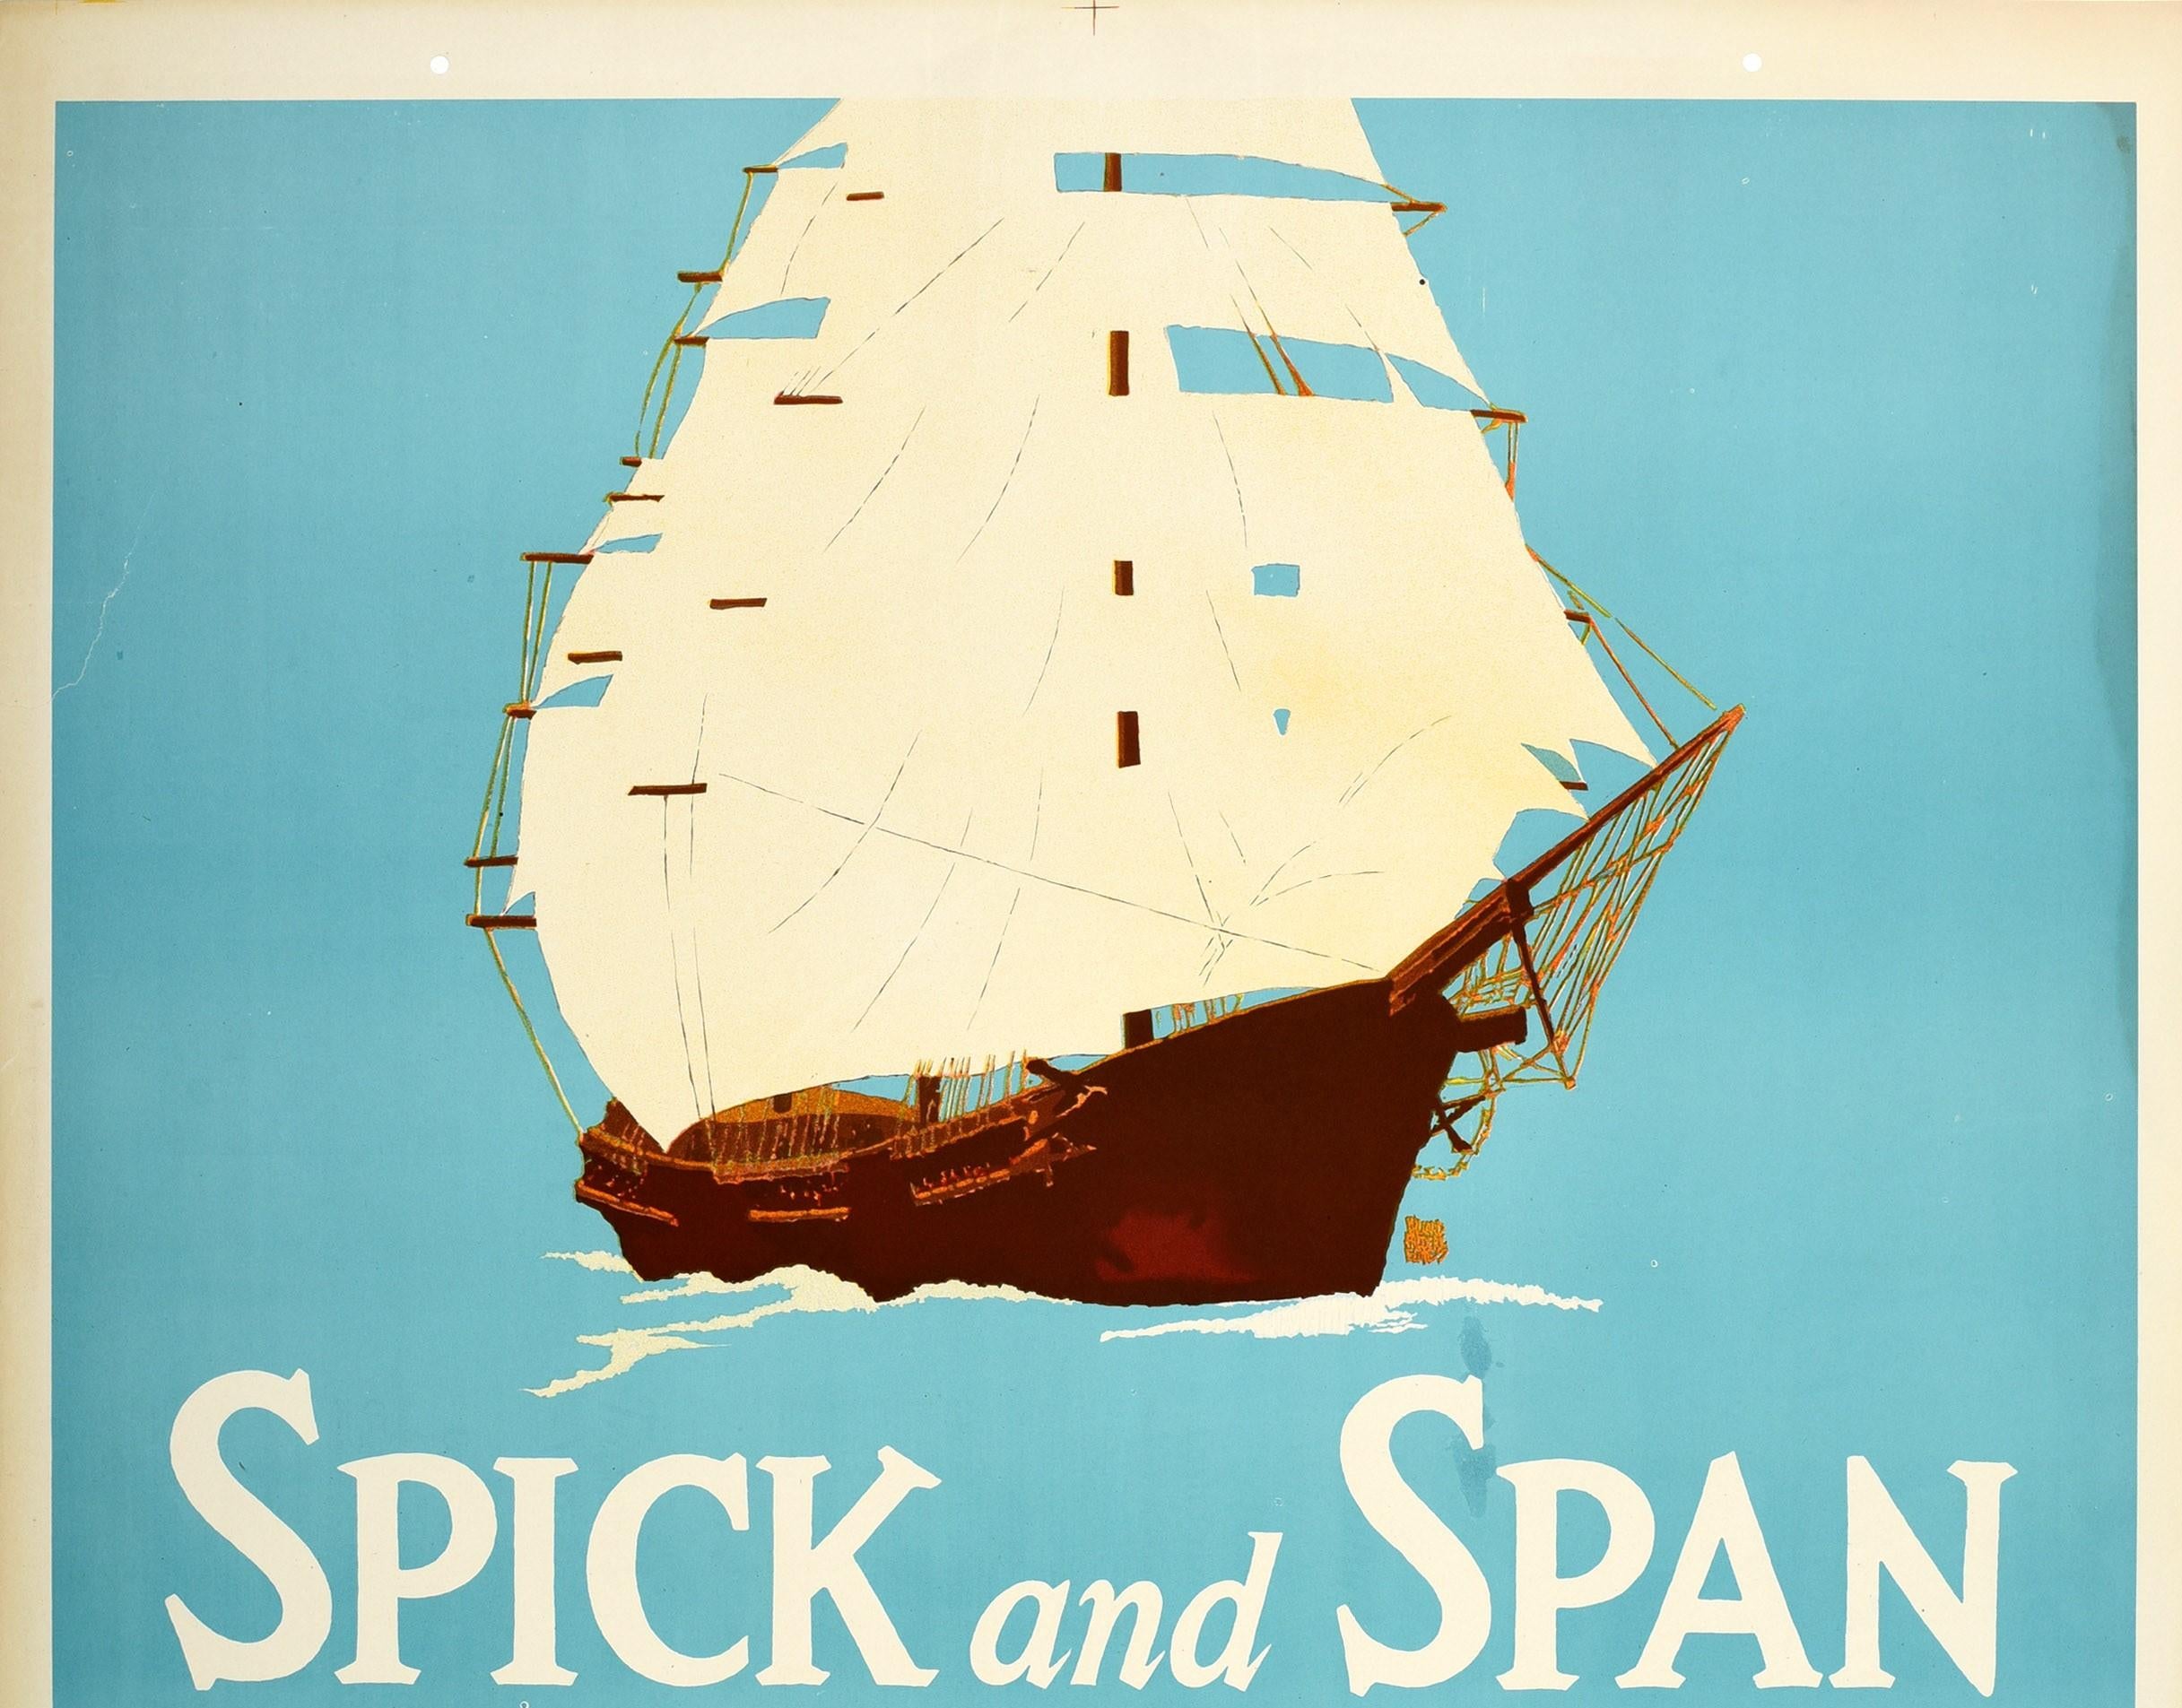 Original vintage motivational poster - Spick and Span Shipshape working place Shipshape results Shipshape record How's It With You? - featuring great artwork depicting an old style wooden schooner ship in full sail against a blue background with the